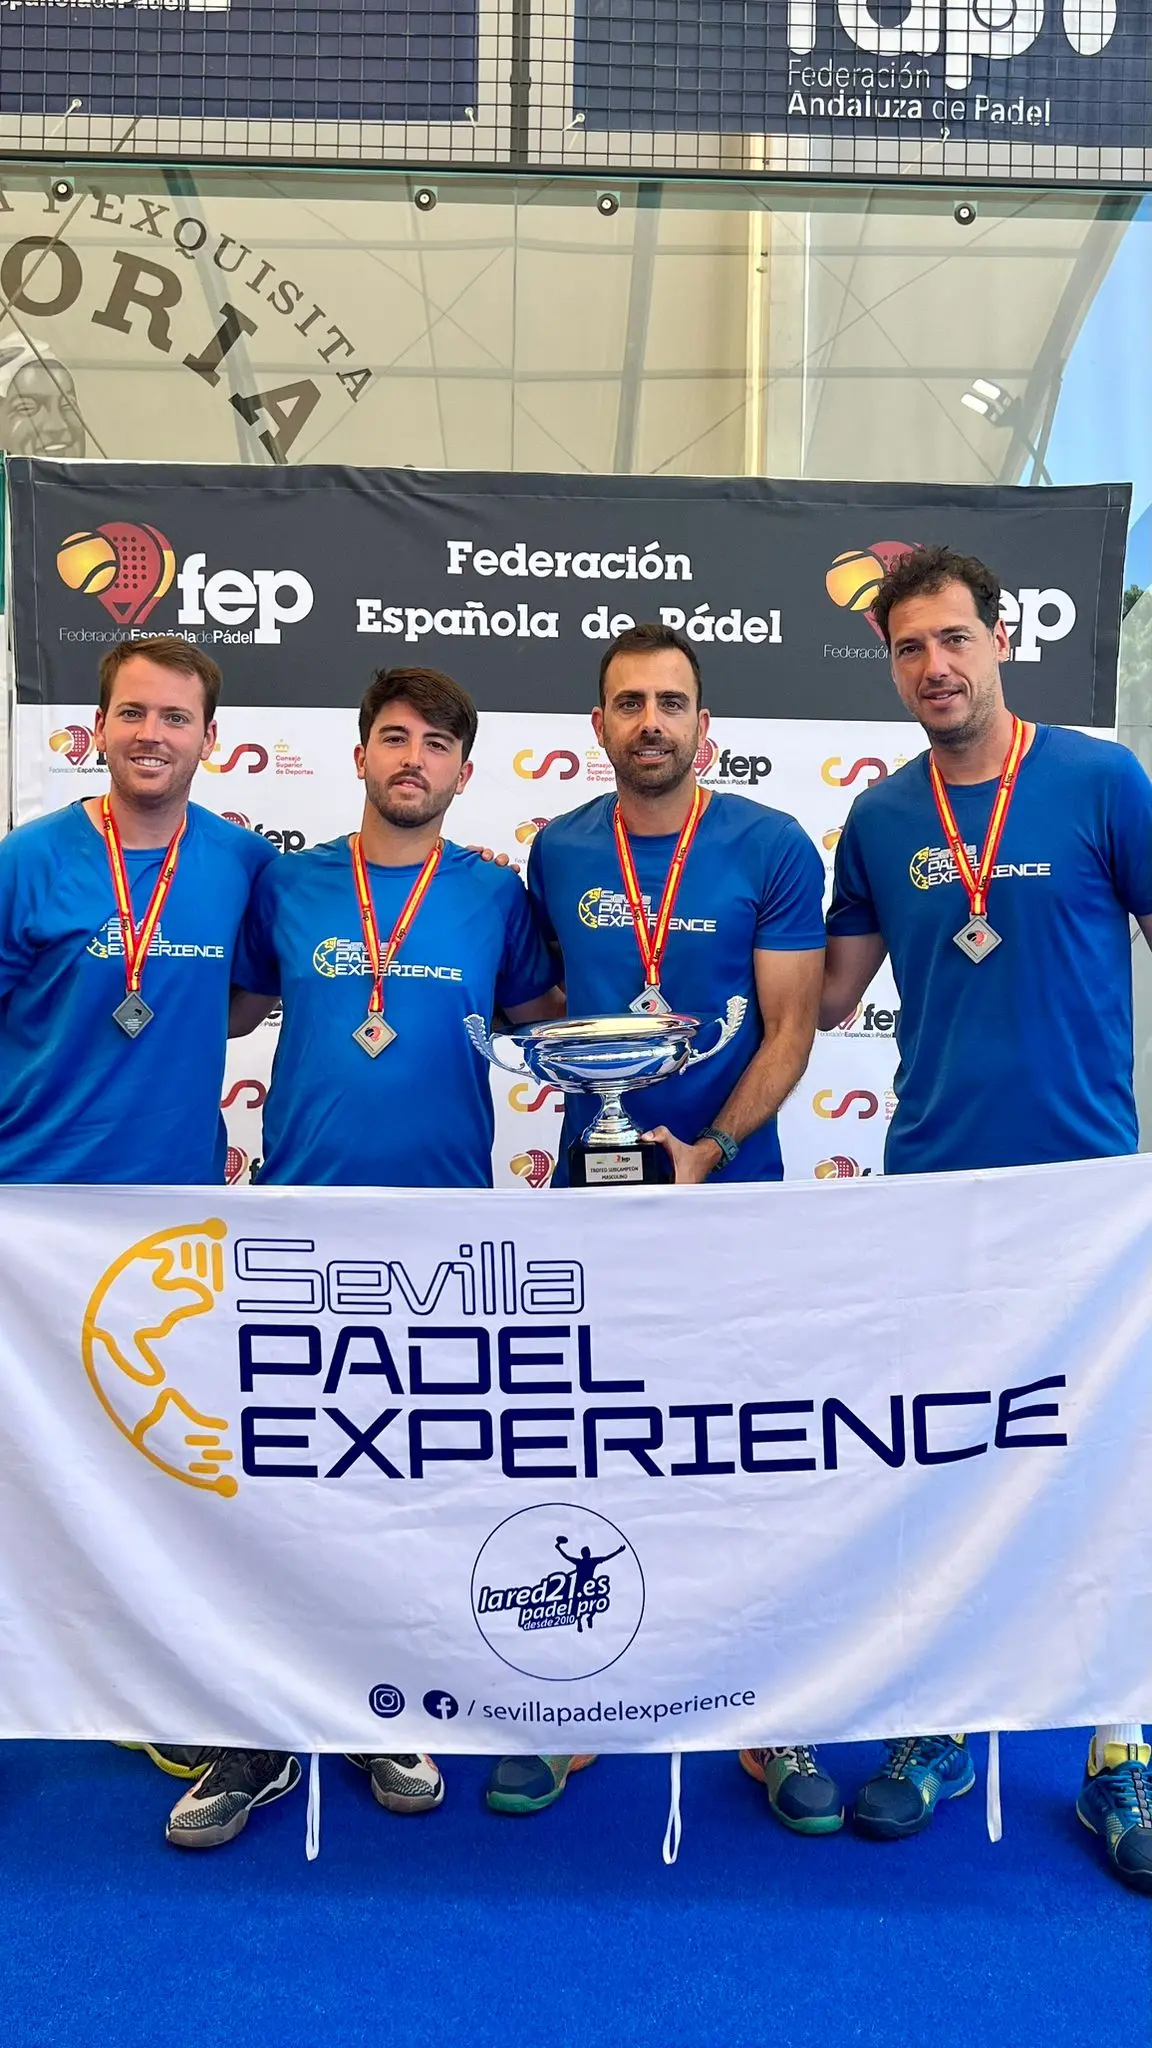 Our SPE technical staff representing the team of La Red 21 Pádel Pro (Seville)